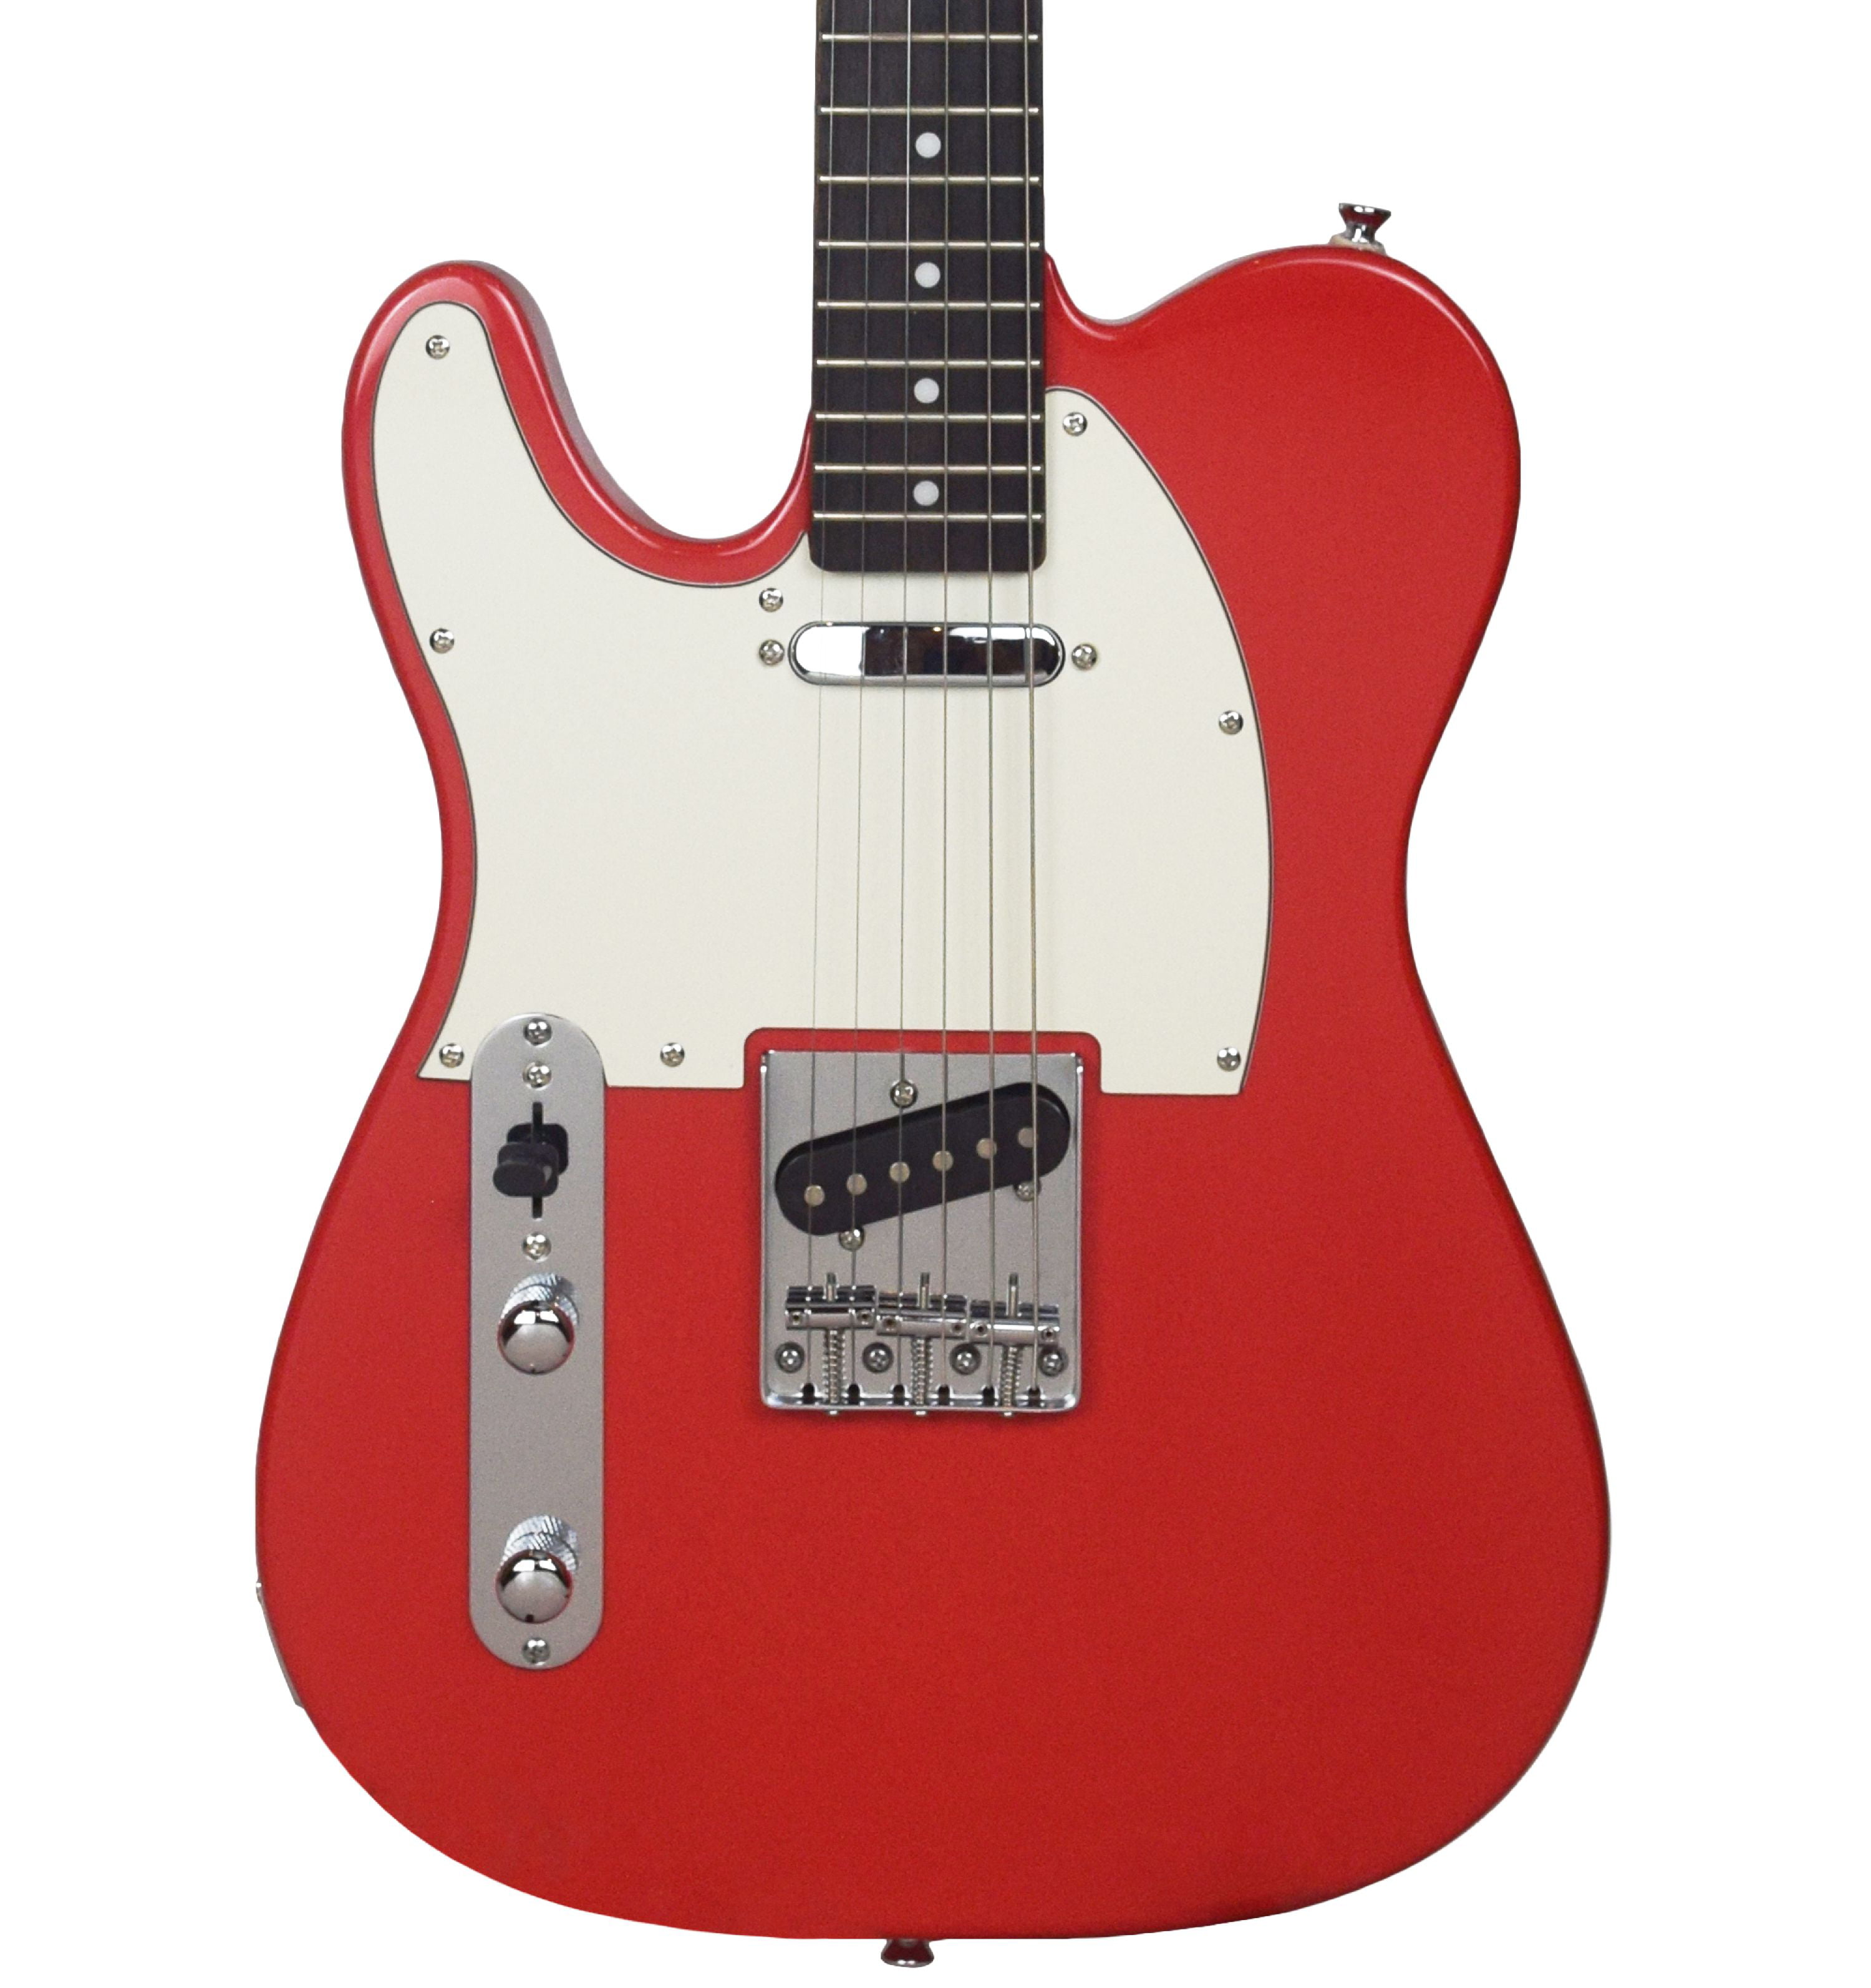 Sawtooth Classic ET 60 Ash Body Left-Handed Electric Guitar, Habanero